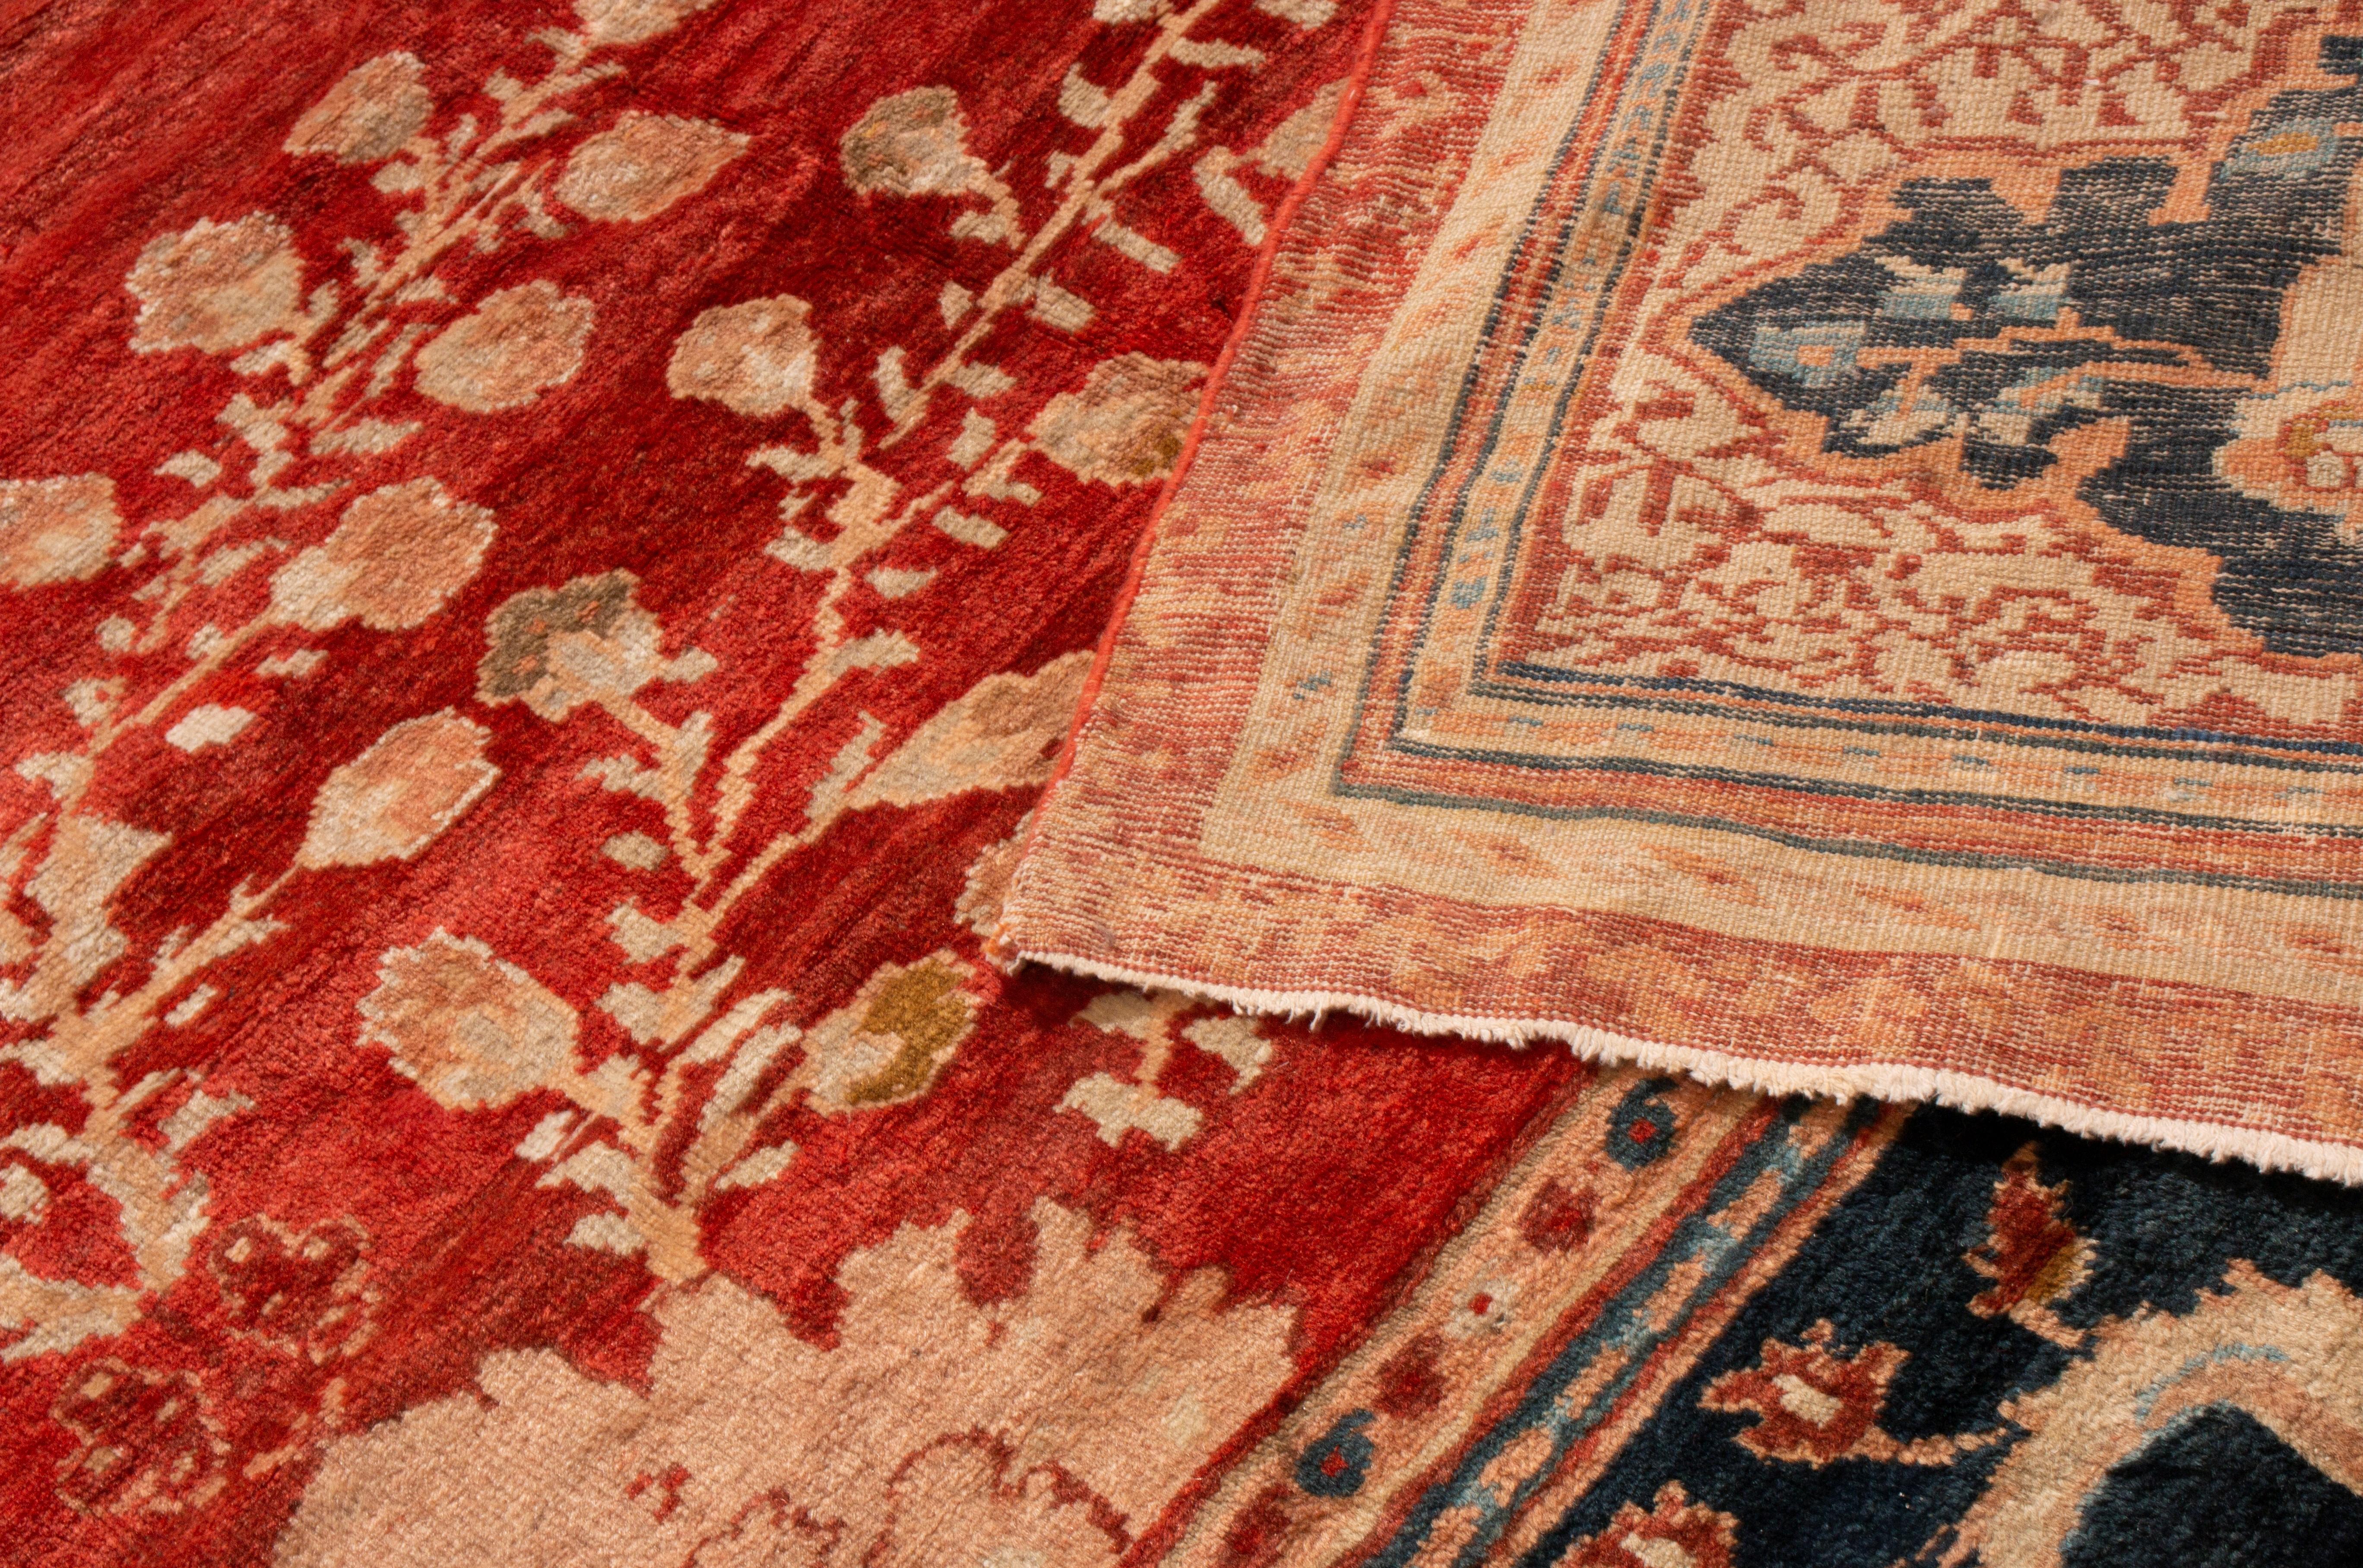 Late 19th Century Antique Sultanabad Red and Gold Medallion Rug with Geometric-Floral Patterns